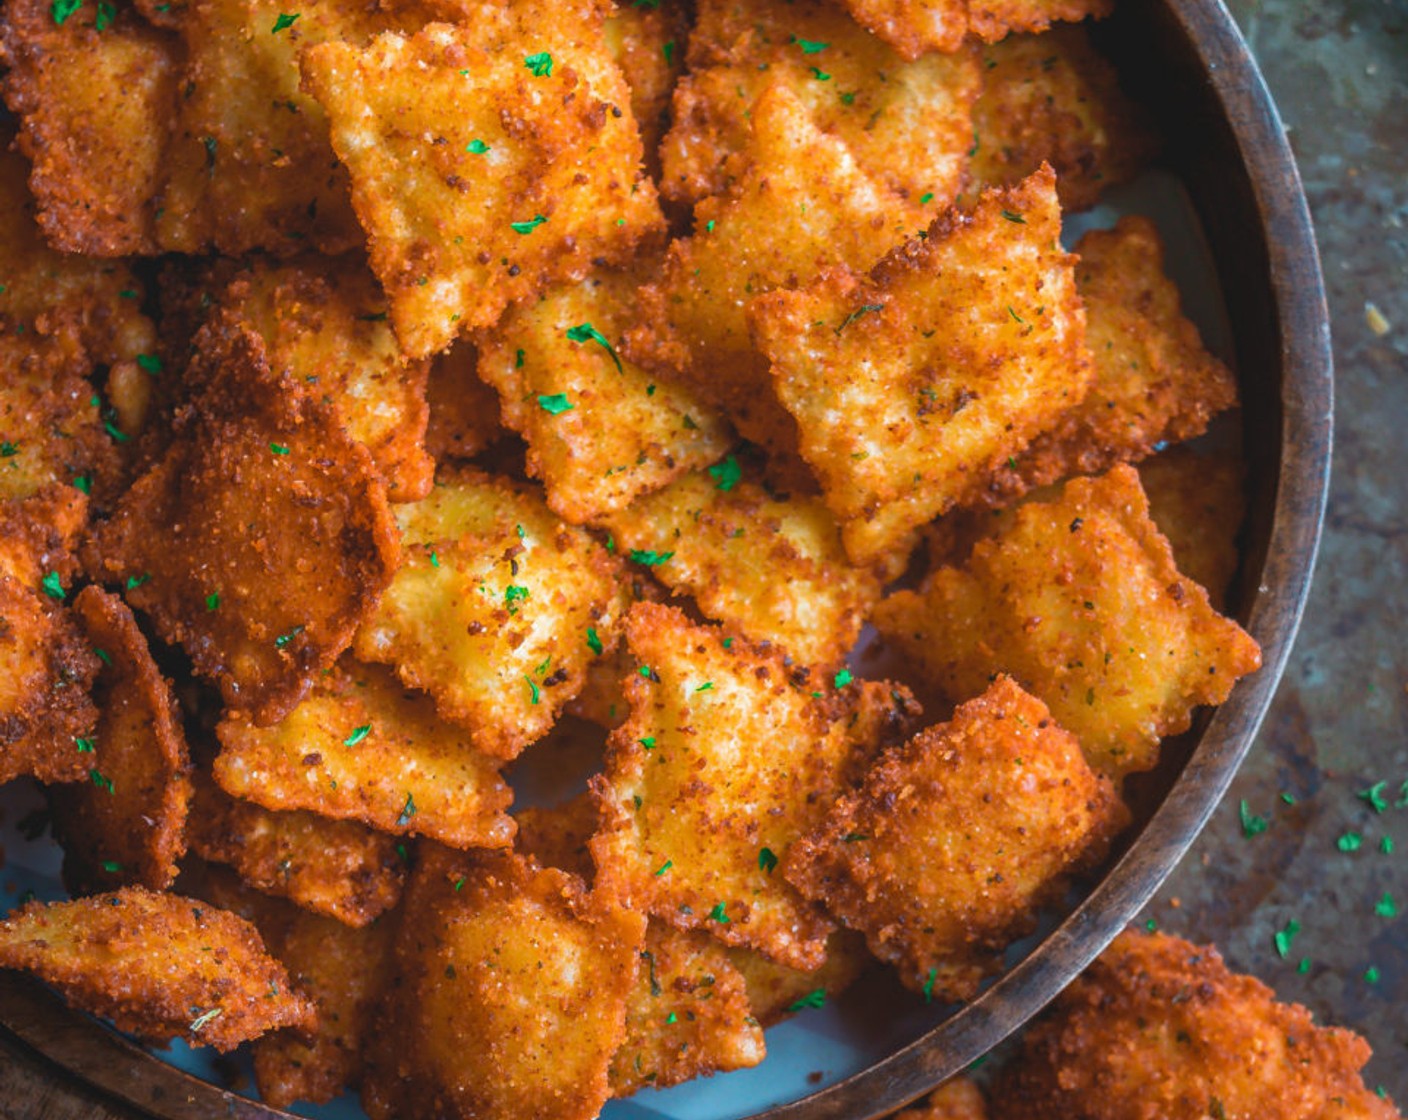 step 7 These vegan Italian fried ravioli can be a meal in itself. They are best enjoyed when served hot with some spicy vegan mayo, Sriracha mixed with vegan mayo, regular tomato ketchup, or marinara sauce on the side.